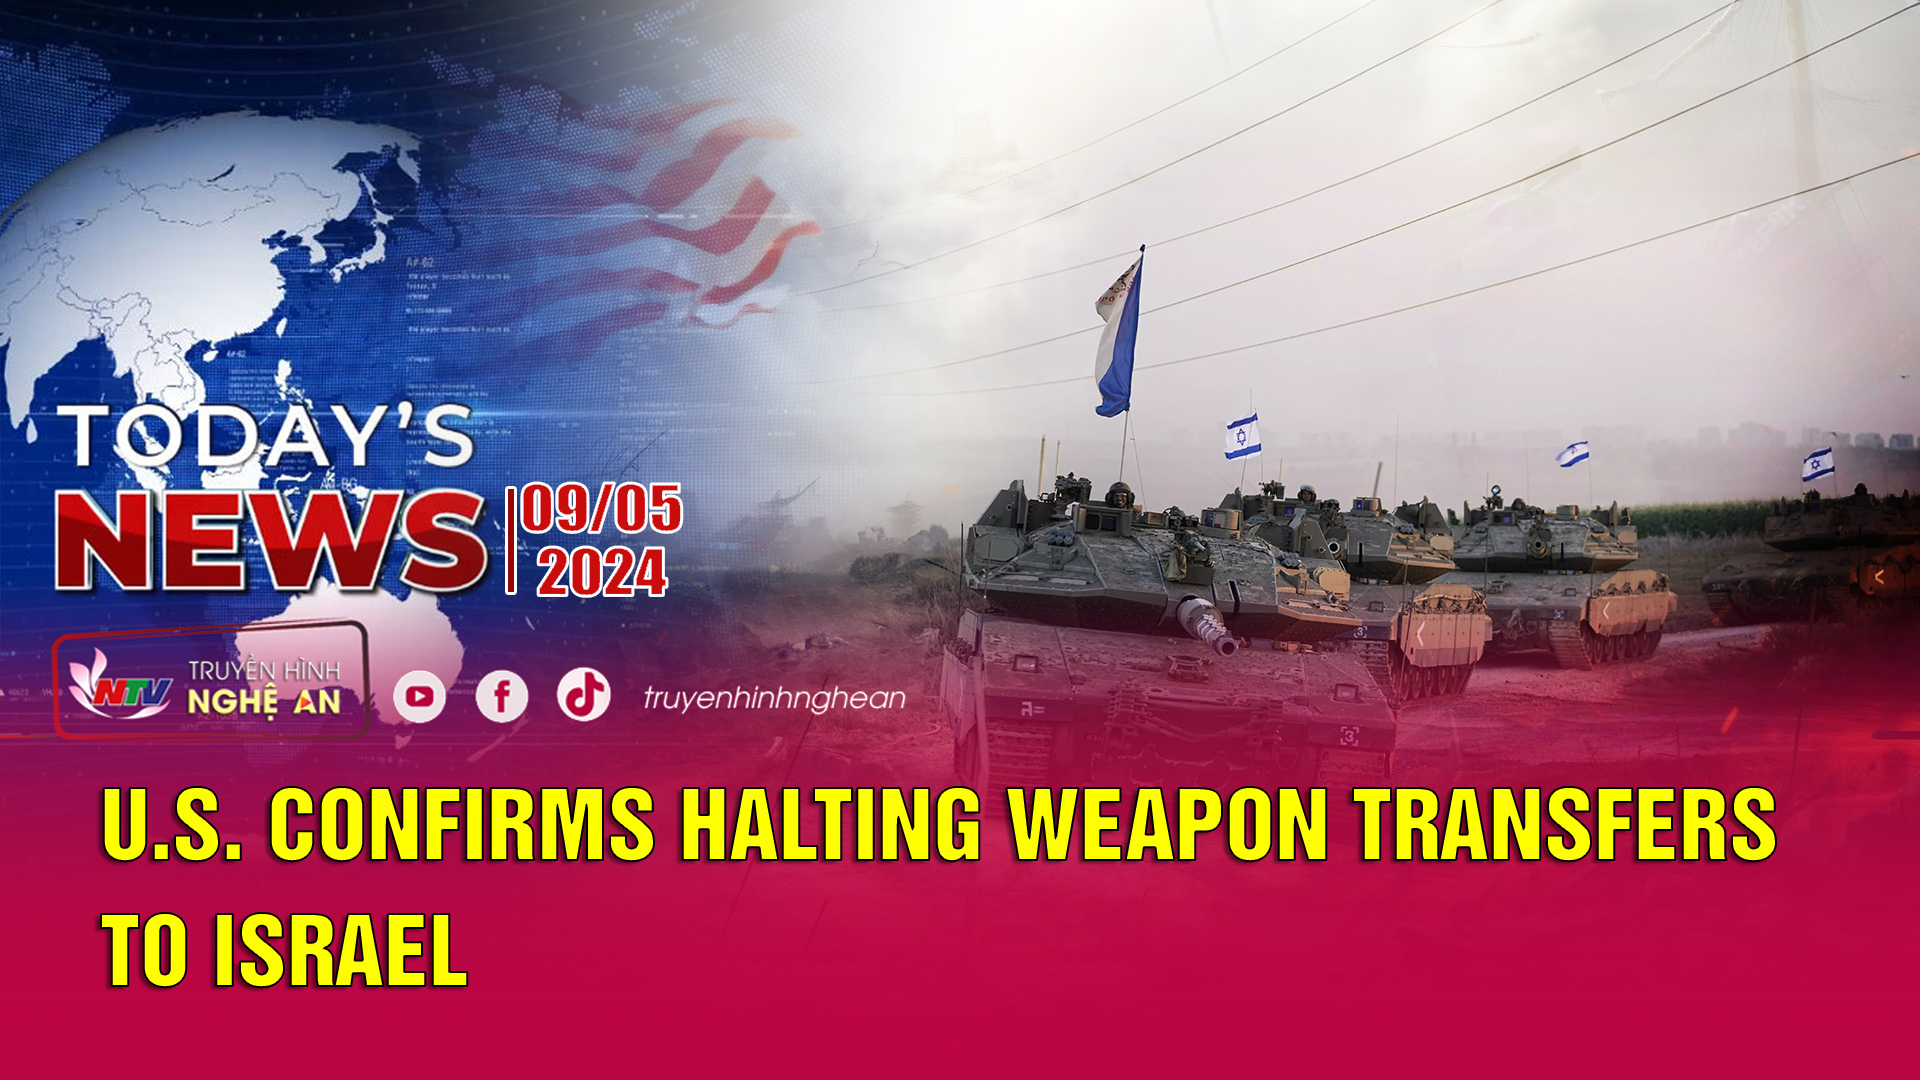 Today's News 09/05/2024: U.S. Confirms Halting Weapon Transfers to Israel